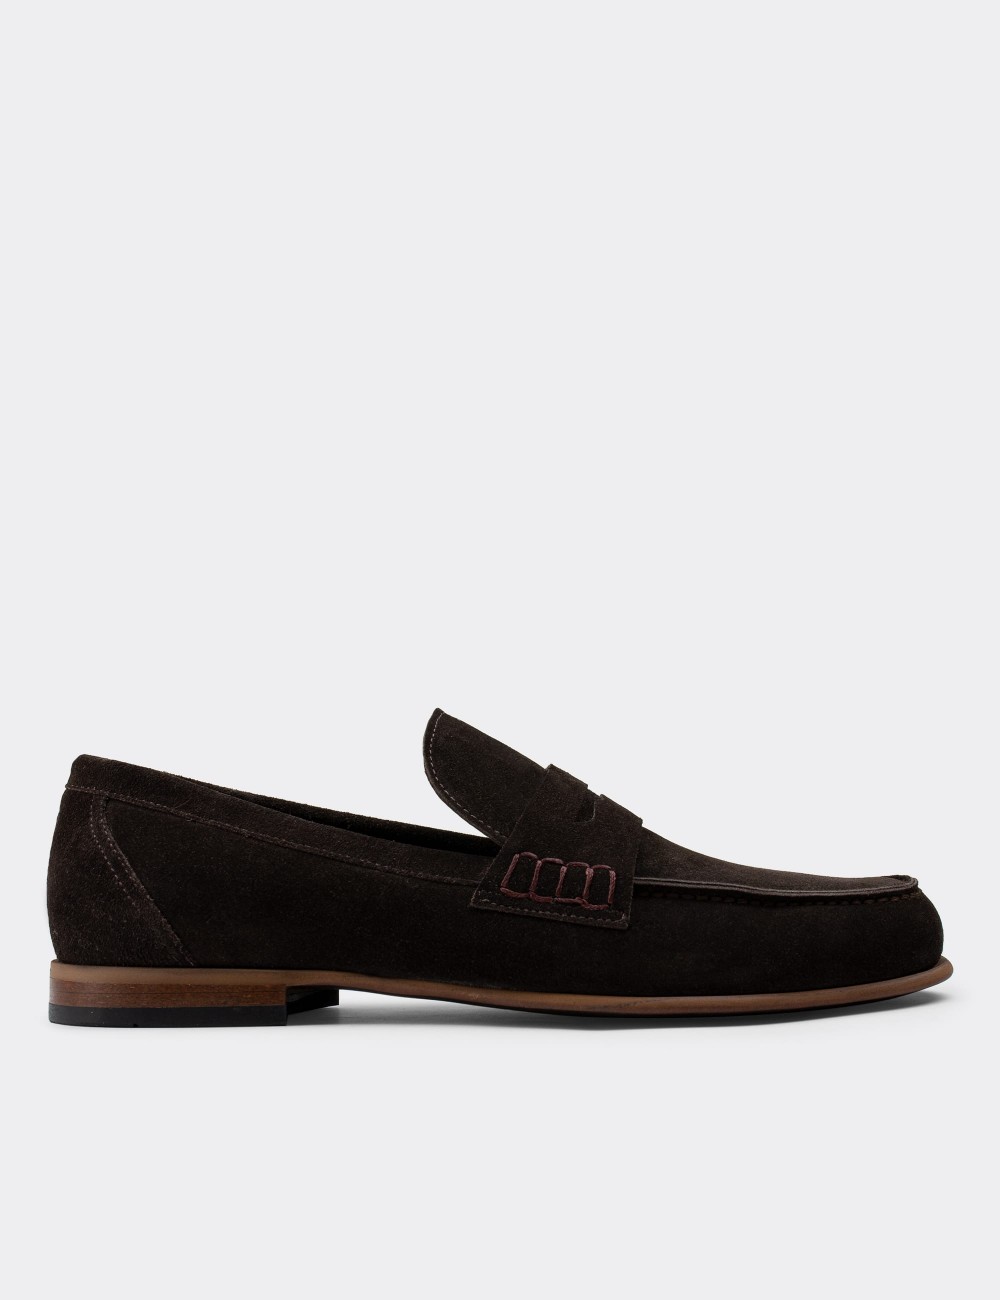 Brown Suede Leather Loafers Shoes - 01538MKHVM02